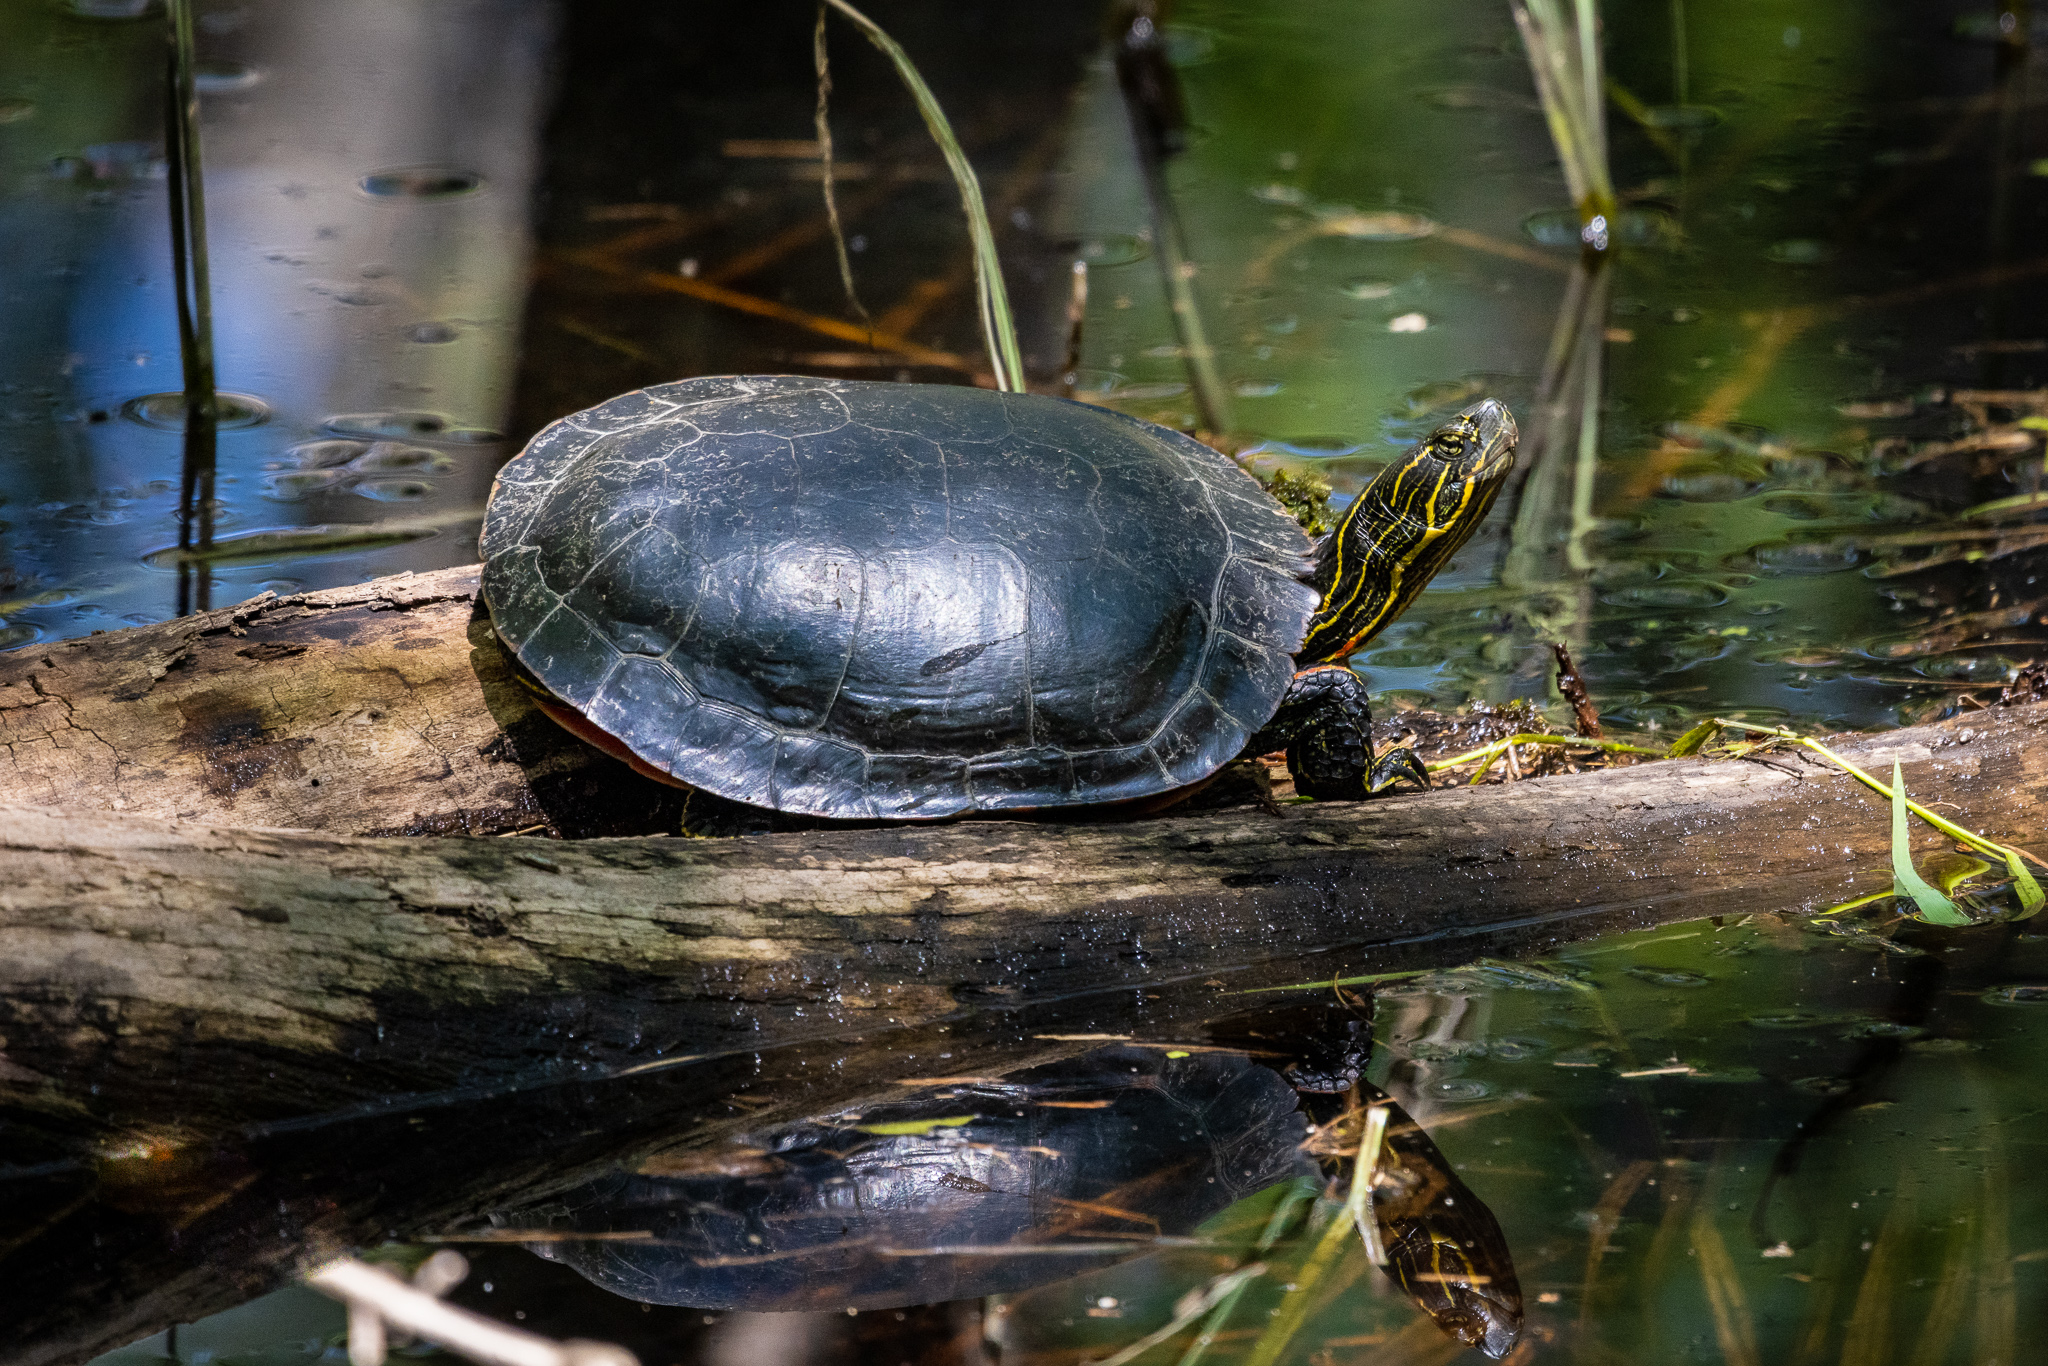 Western Painted Turtle at Kettle Falls Dam in Voyageurs National Park, Minnesota